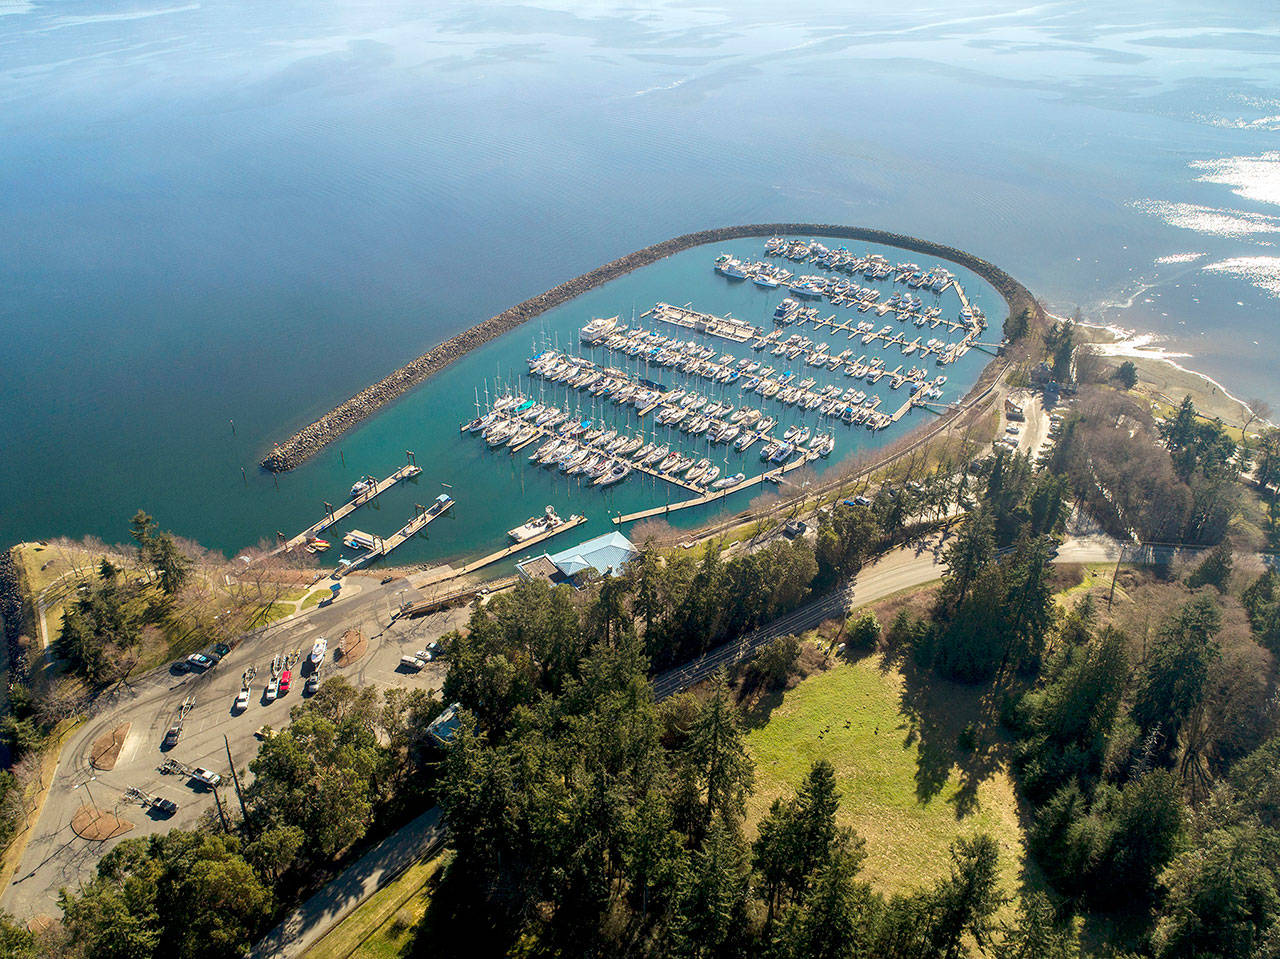 The future of the John Wayne Marina, seen here from the air, is under evaluation both by the city of Sequim and the Jamestown S’Klallam Tribe. (John Gussman)